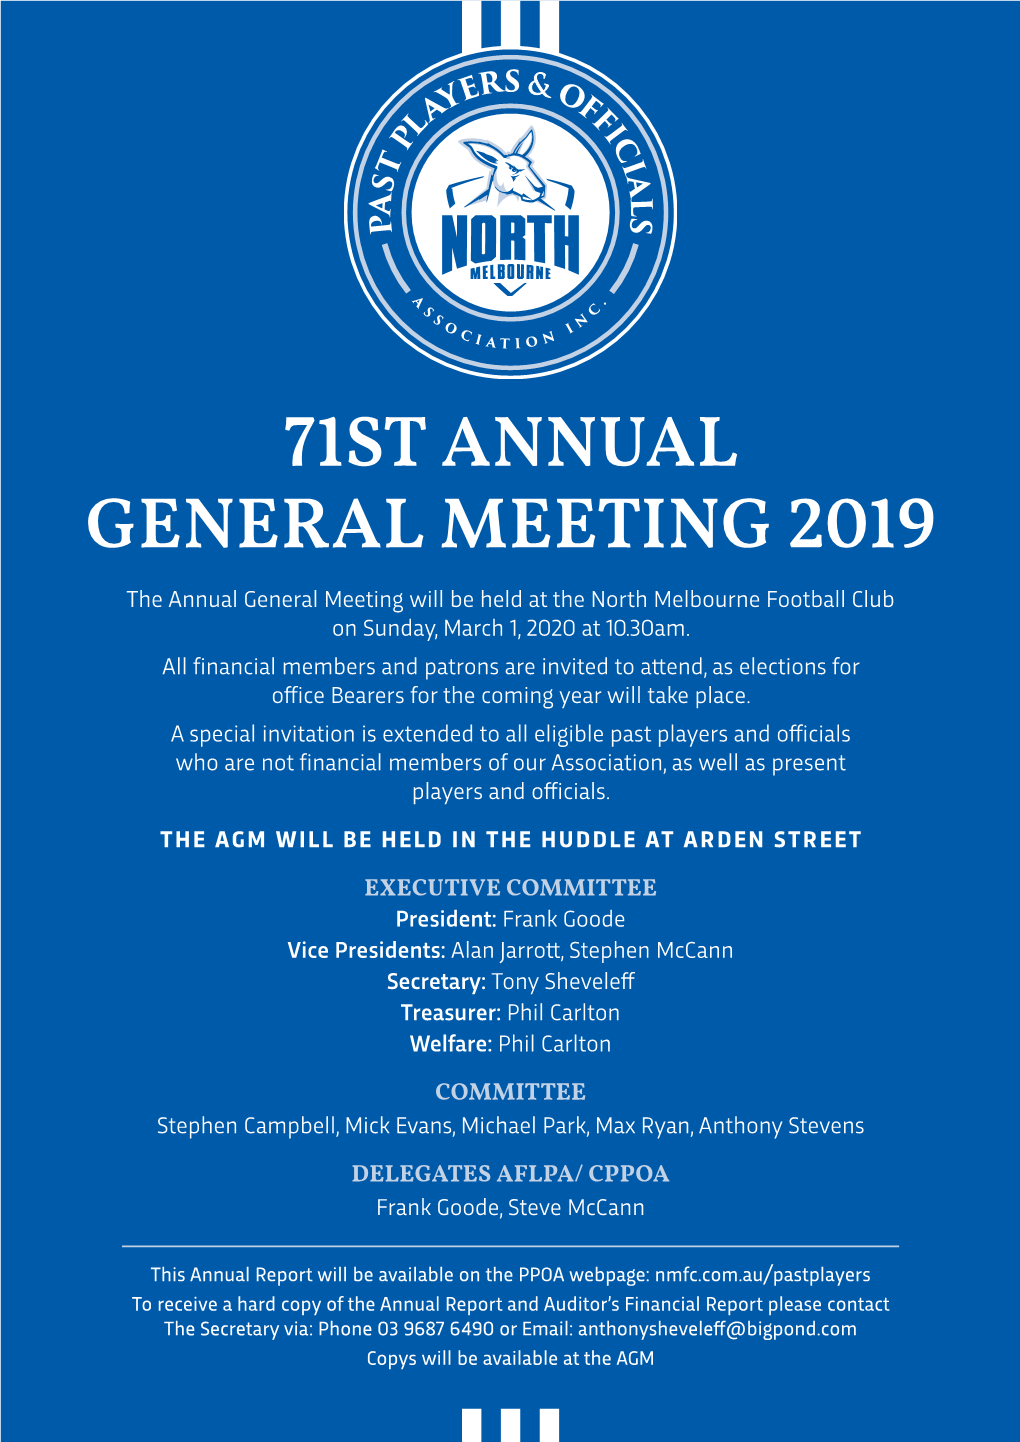 71ST ANNUAL GENERAL MEETING 2019 the Annual General Meeting Will Be Held at the North Melbourne Football Club on Sunday, March 1, 2020 at 10.30Am